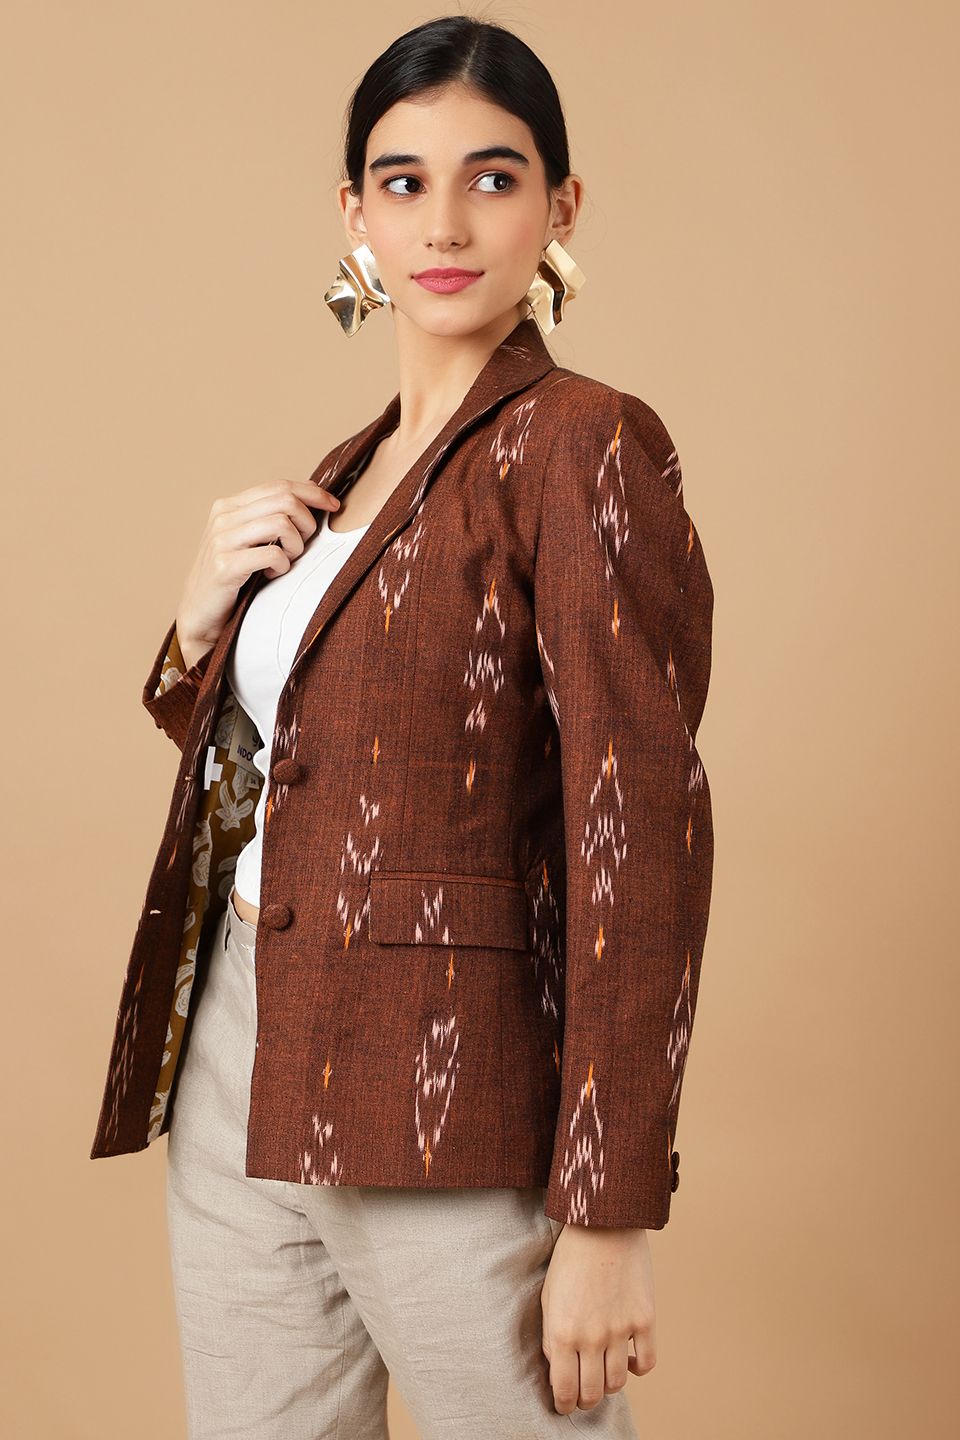 Iroko Brown Blazer Open front Outwear With Pockets For Women